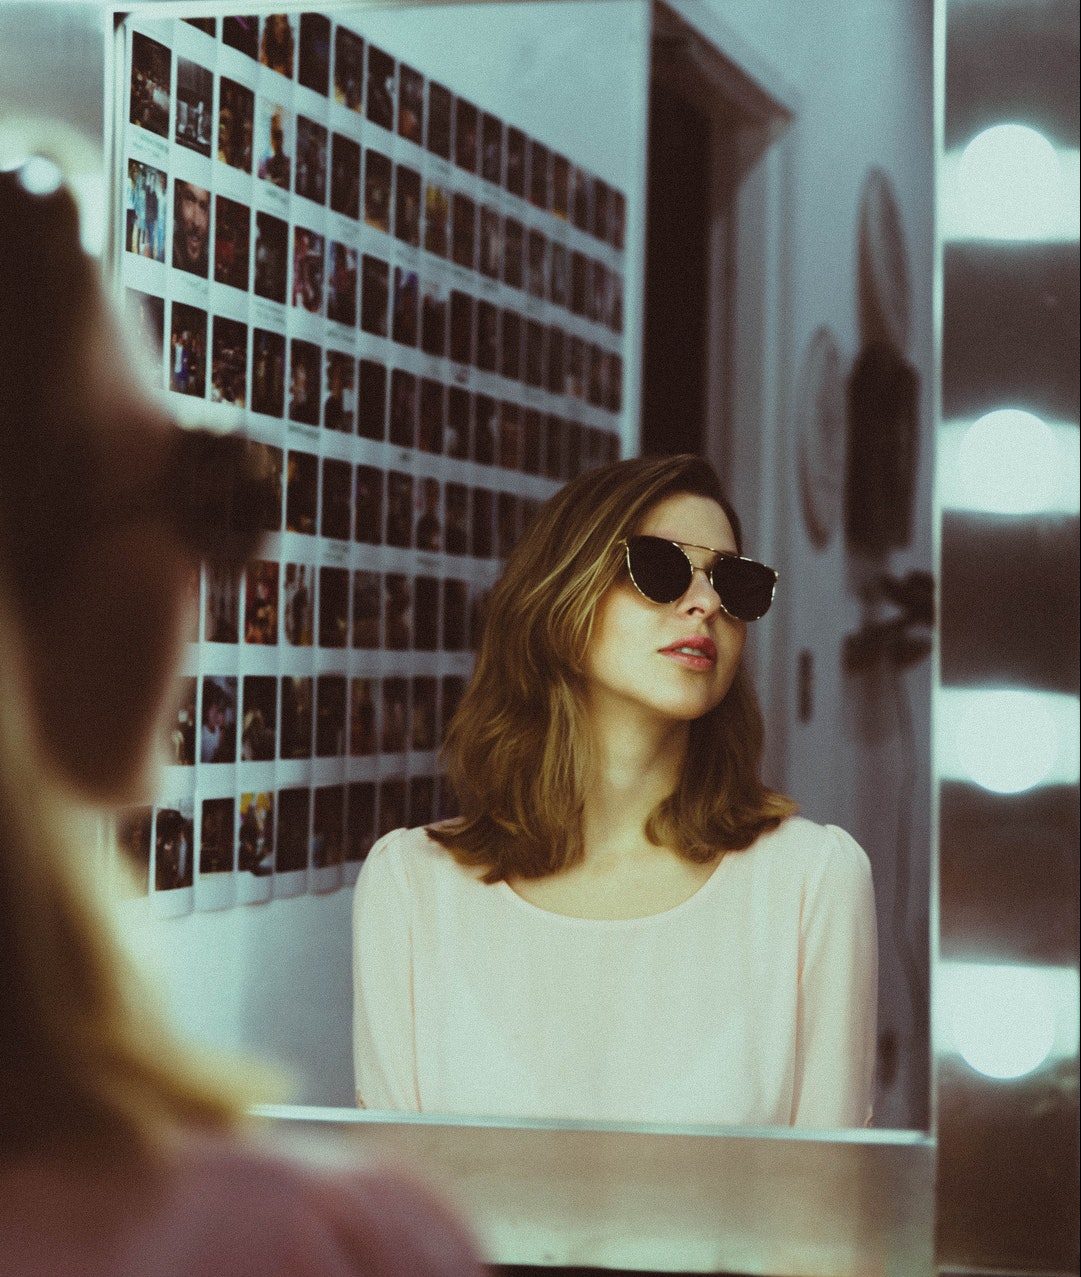 13 Signs You’re More Self-Aware Than You Think